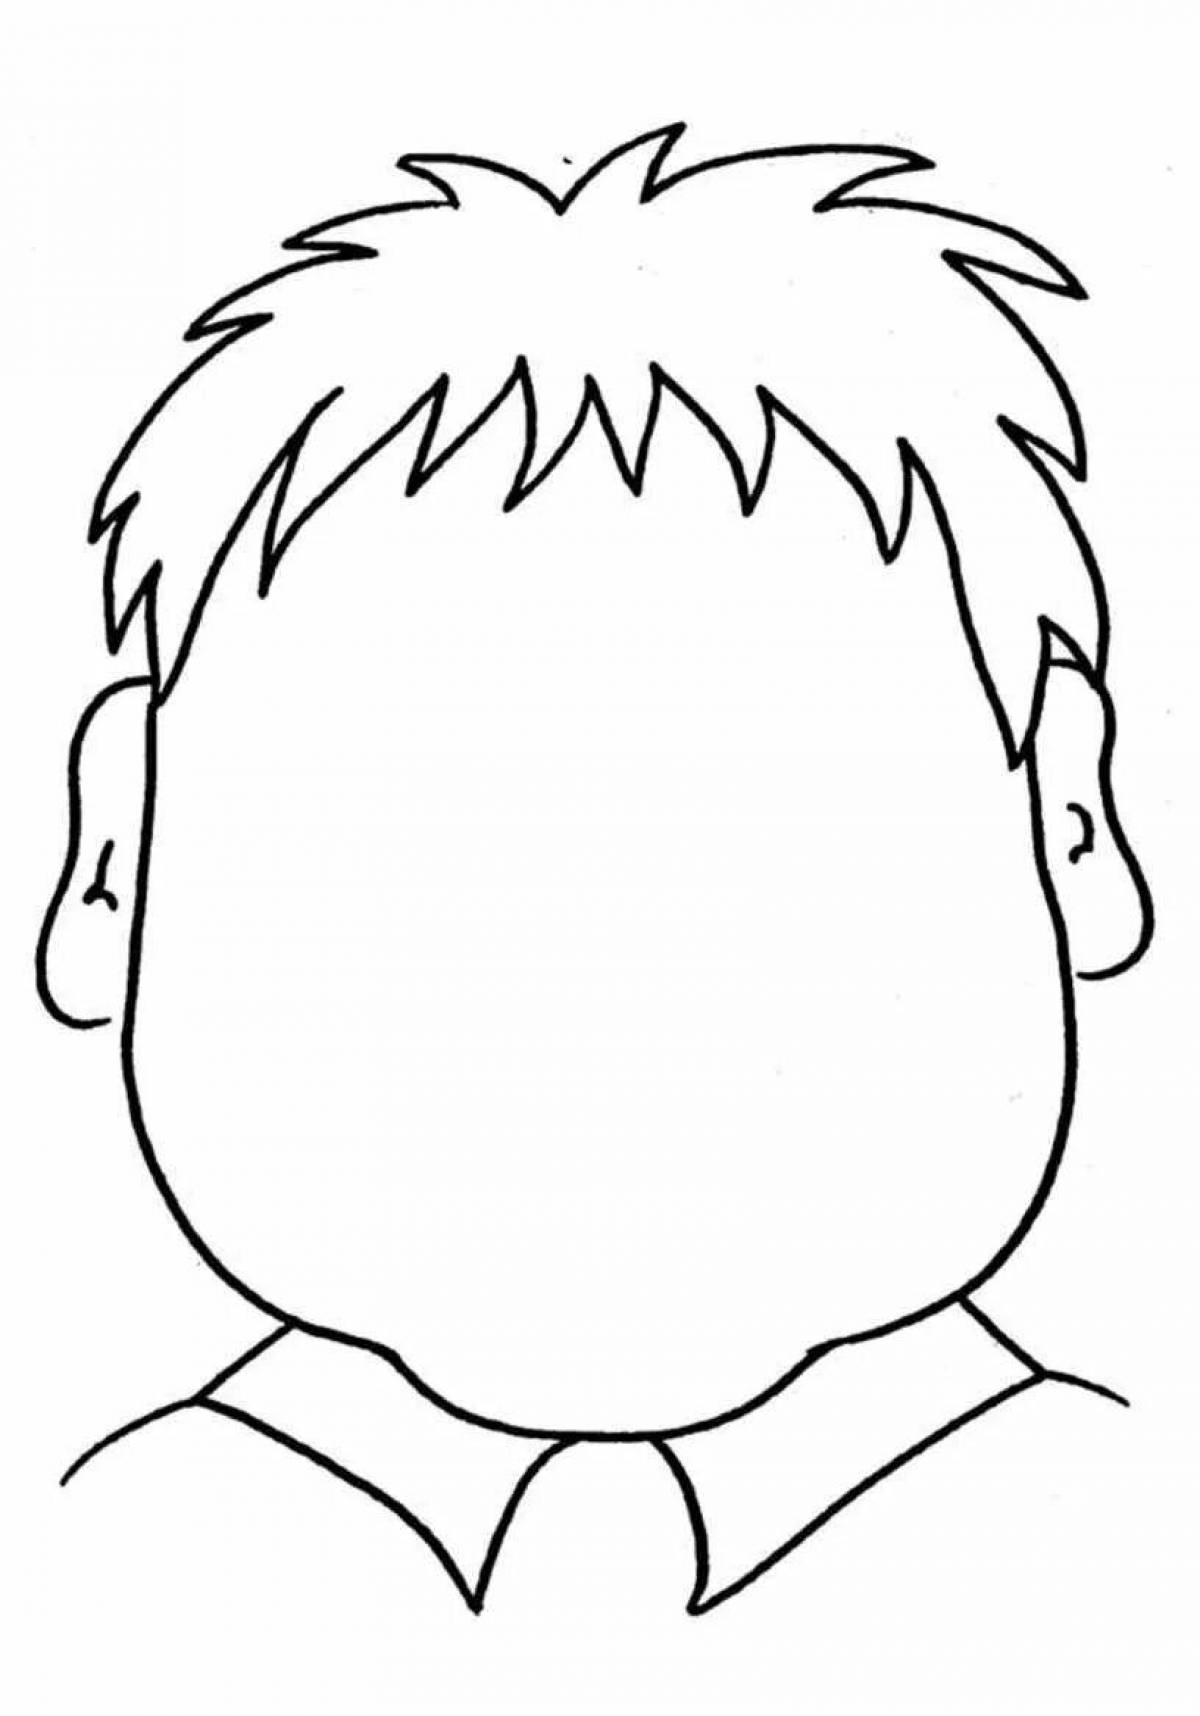 Crying face coloring page